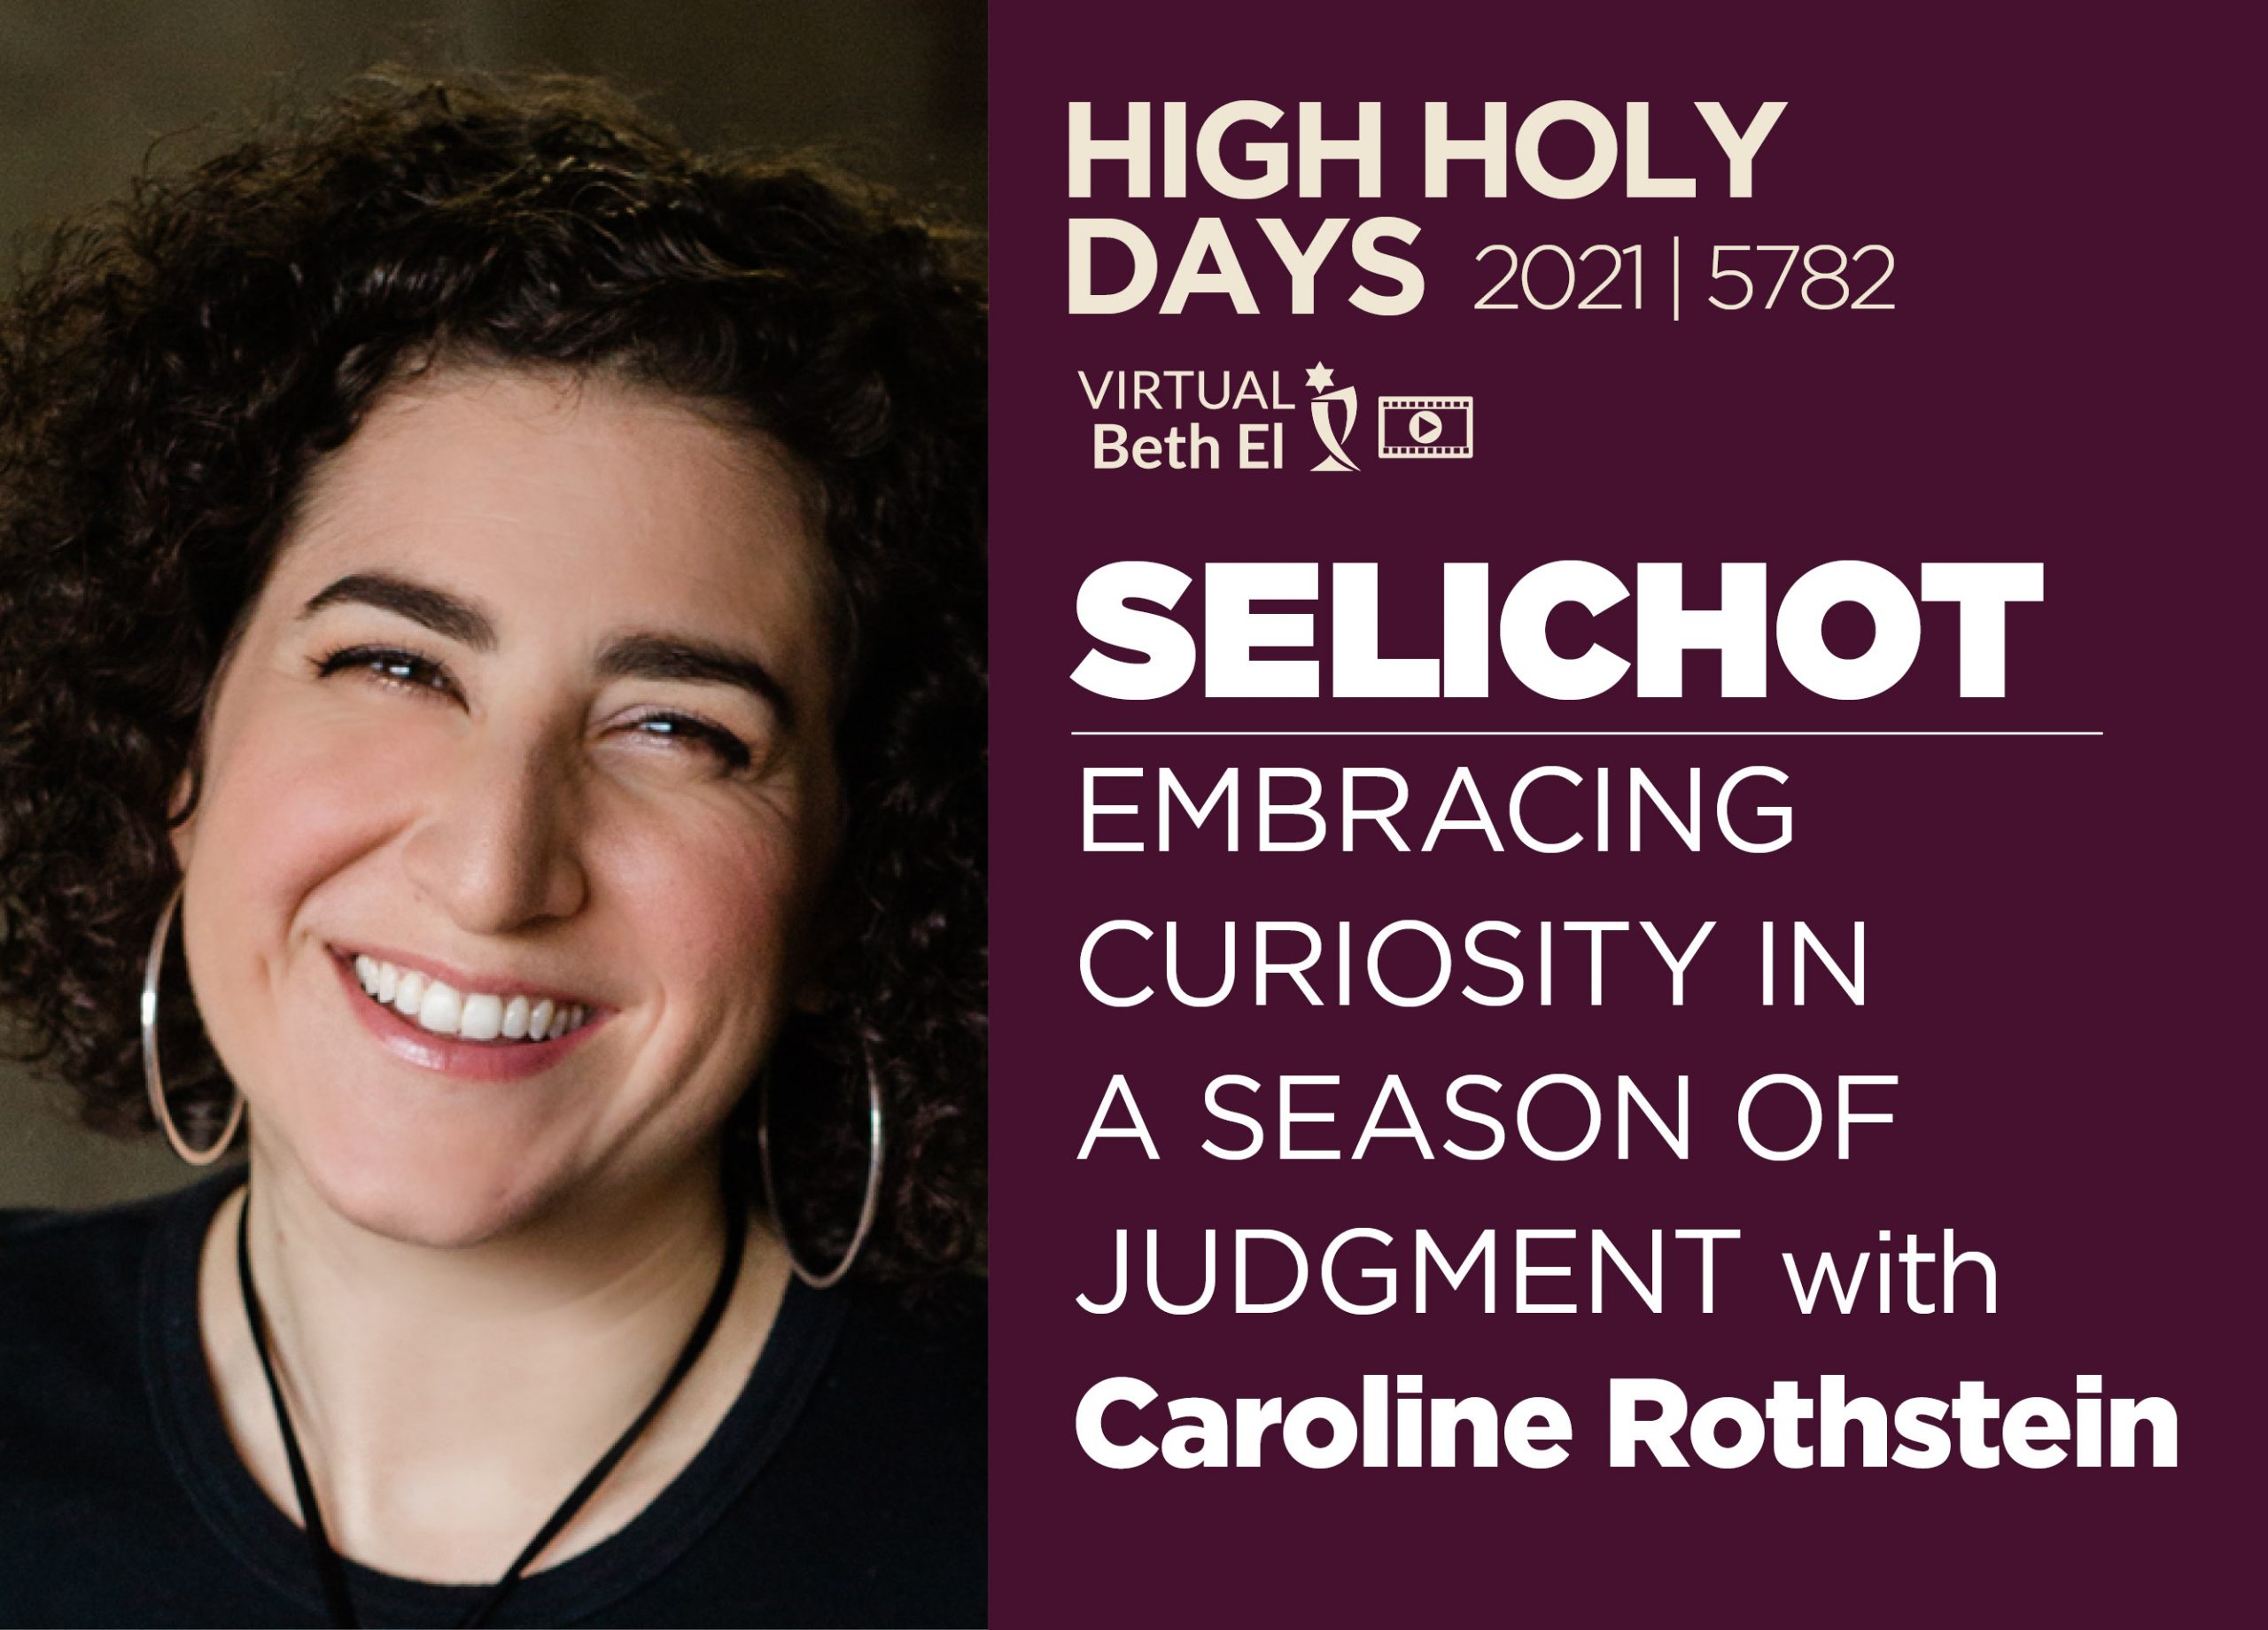 Selichot: Embracing Curiosity in a Season of Judgement with Caroline Rothstein event graphic for Temple Beth El August 2021